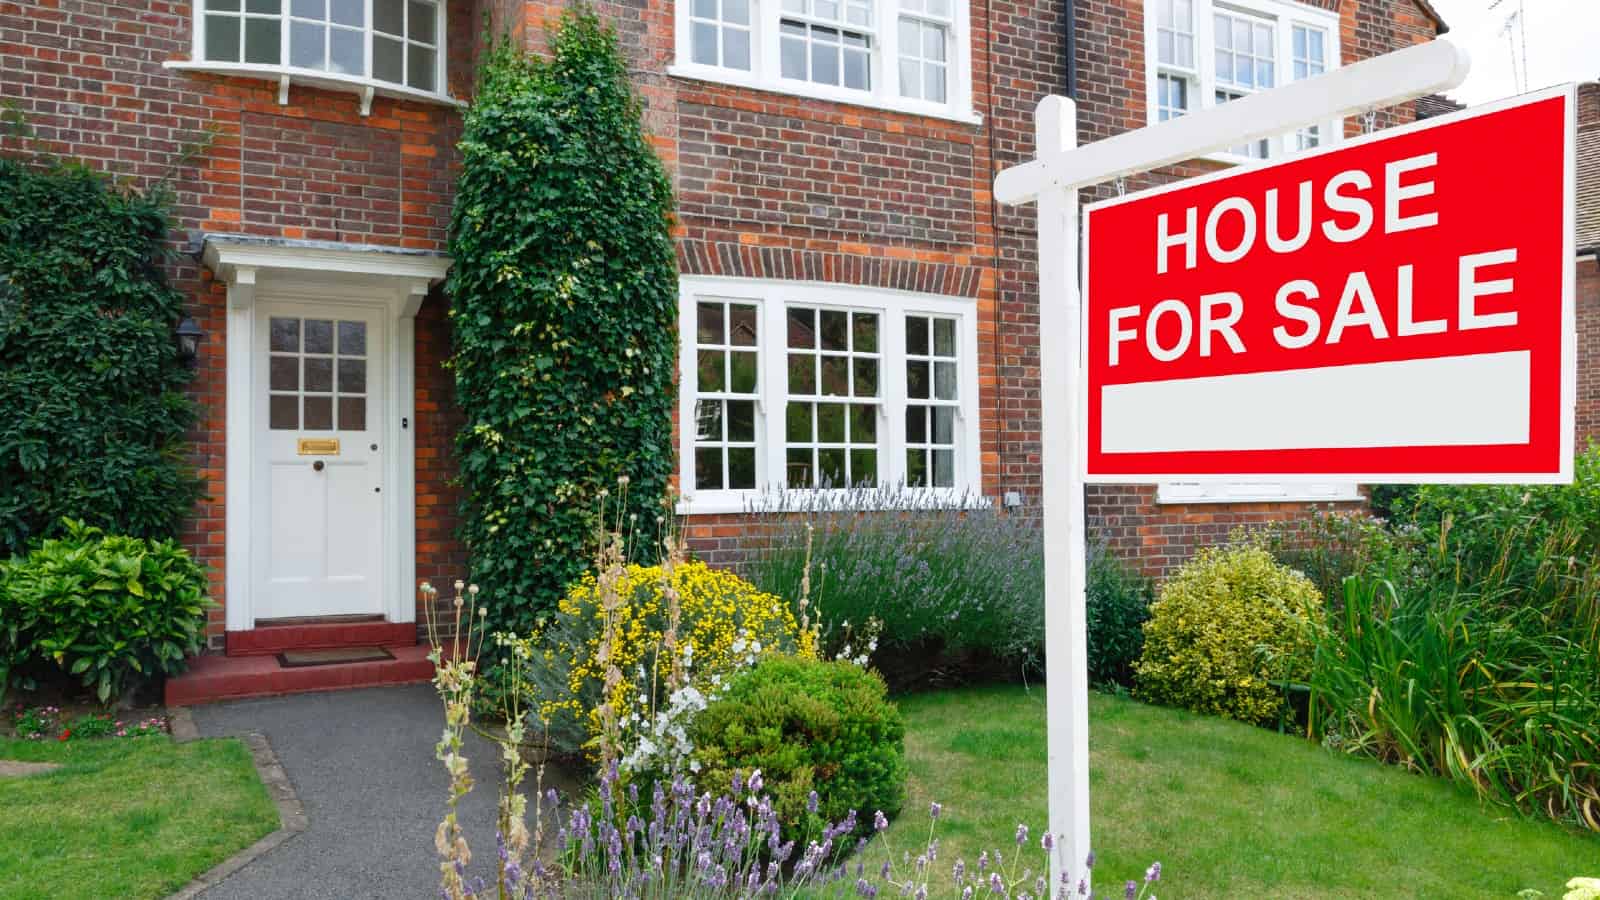 For sale sign outside a home in an affluent suburb of London